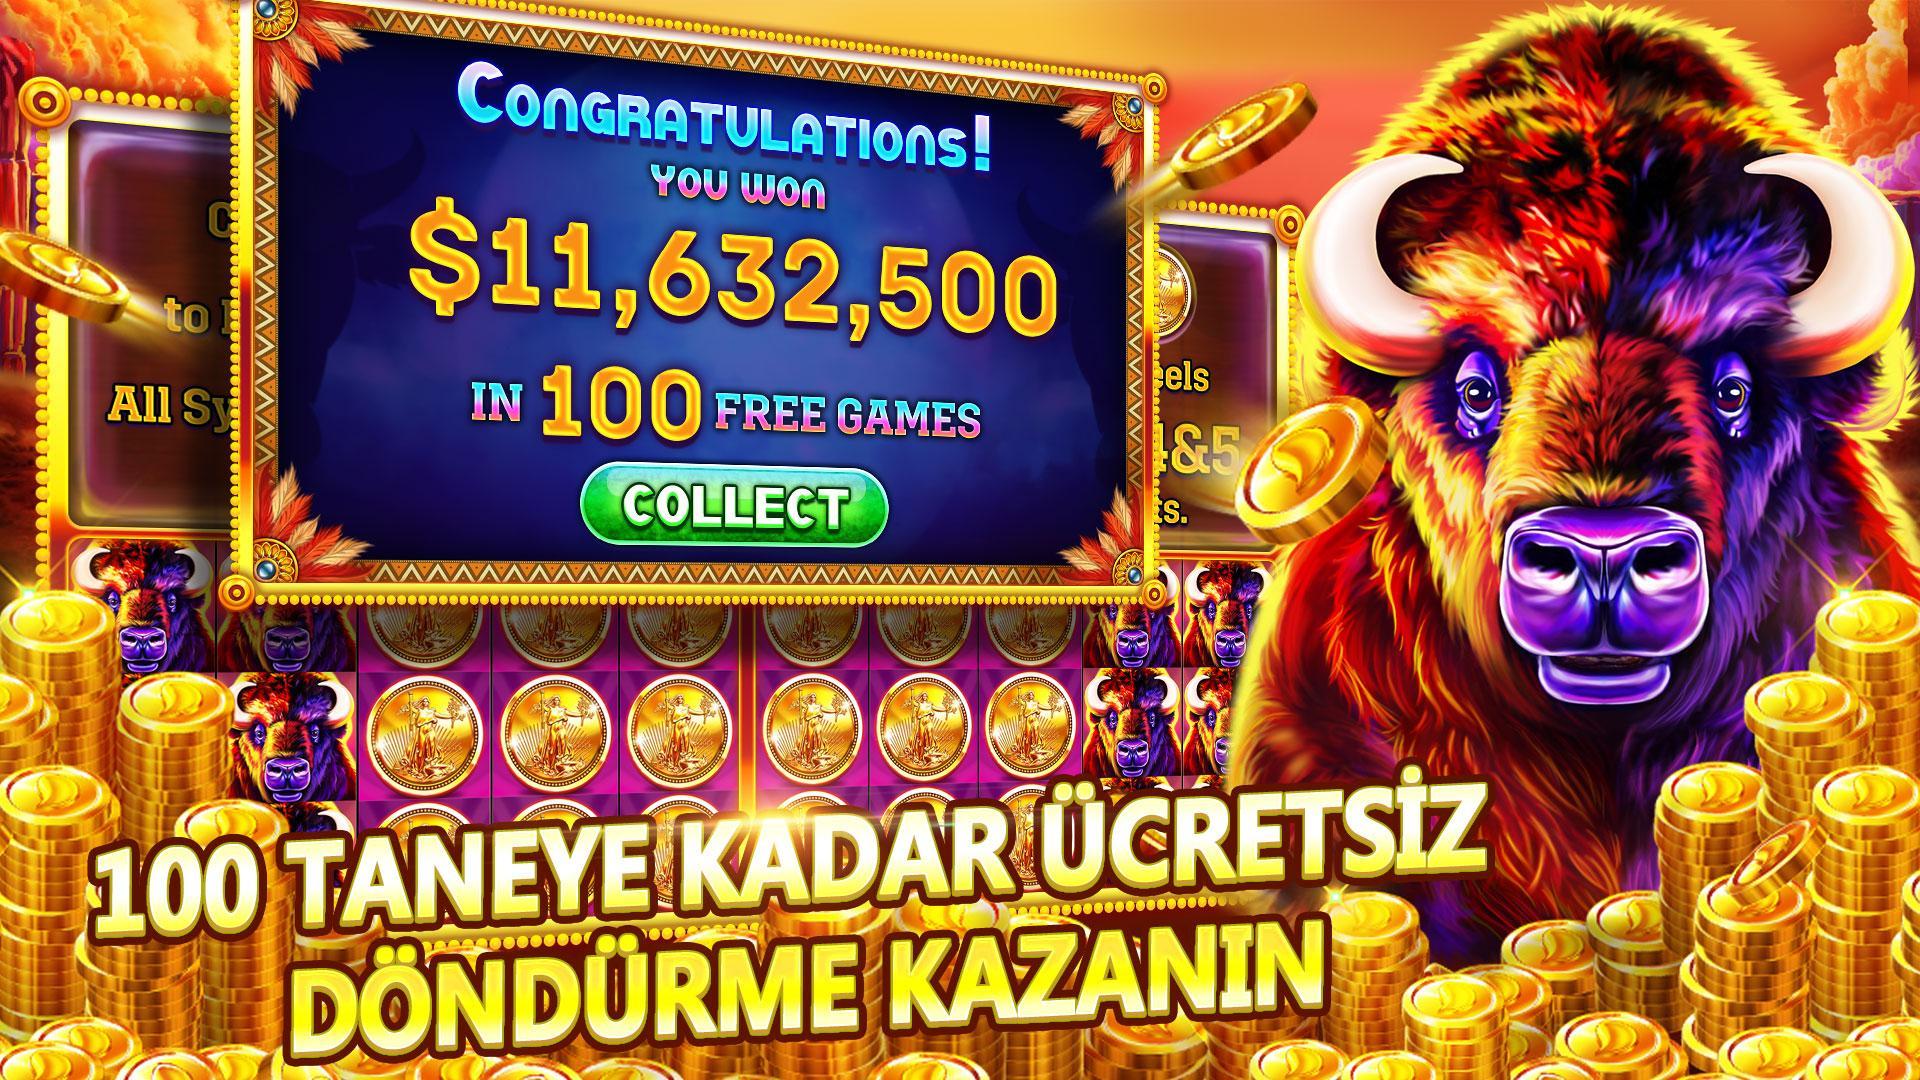 Jackpot party casino slots hack unlimited coins ulule